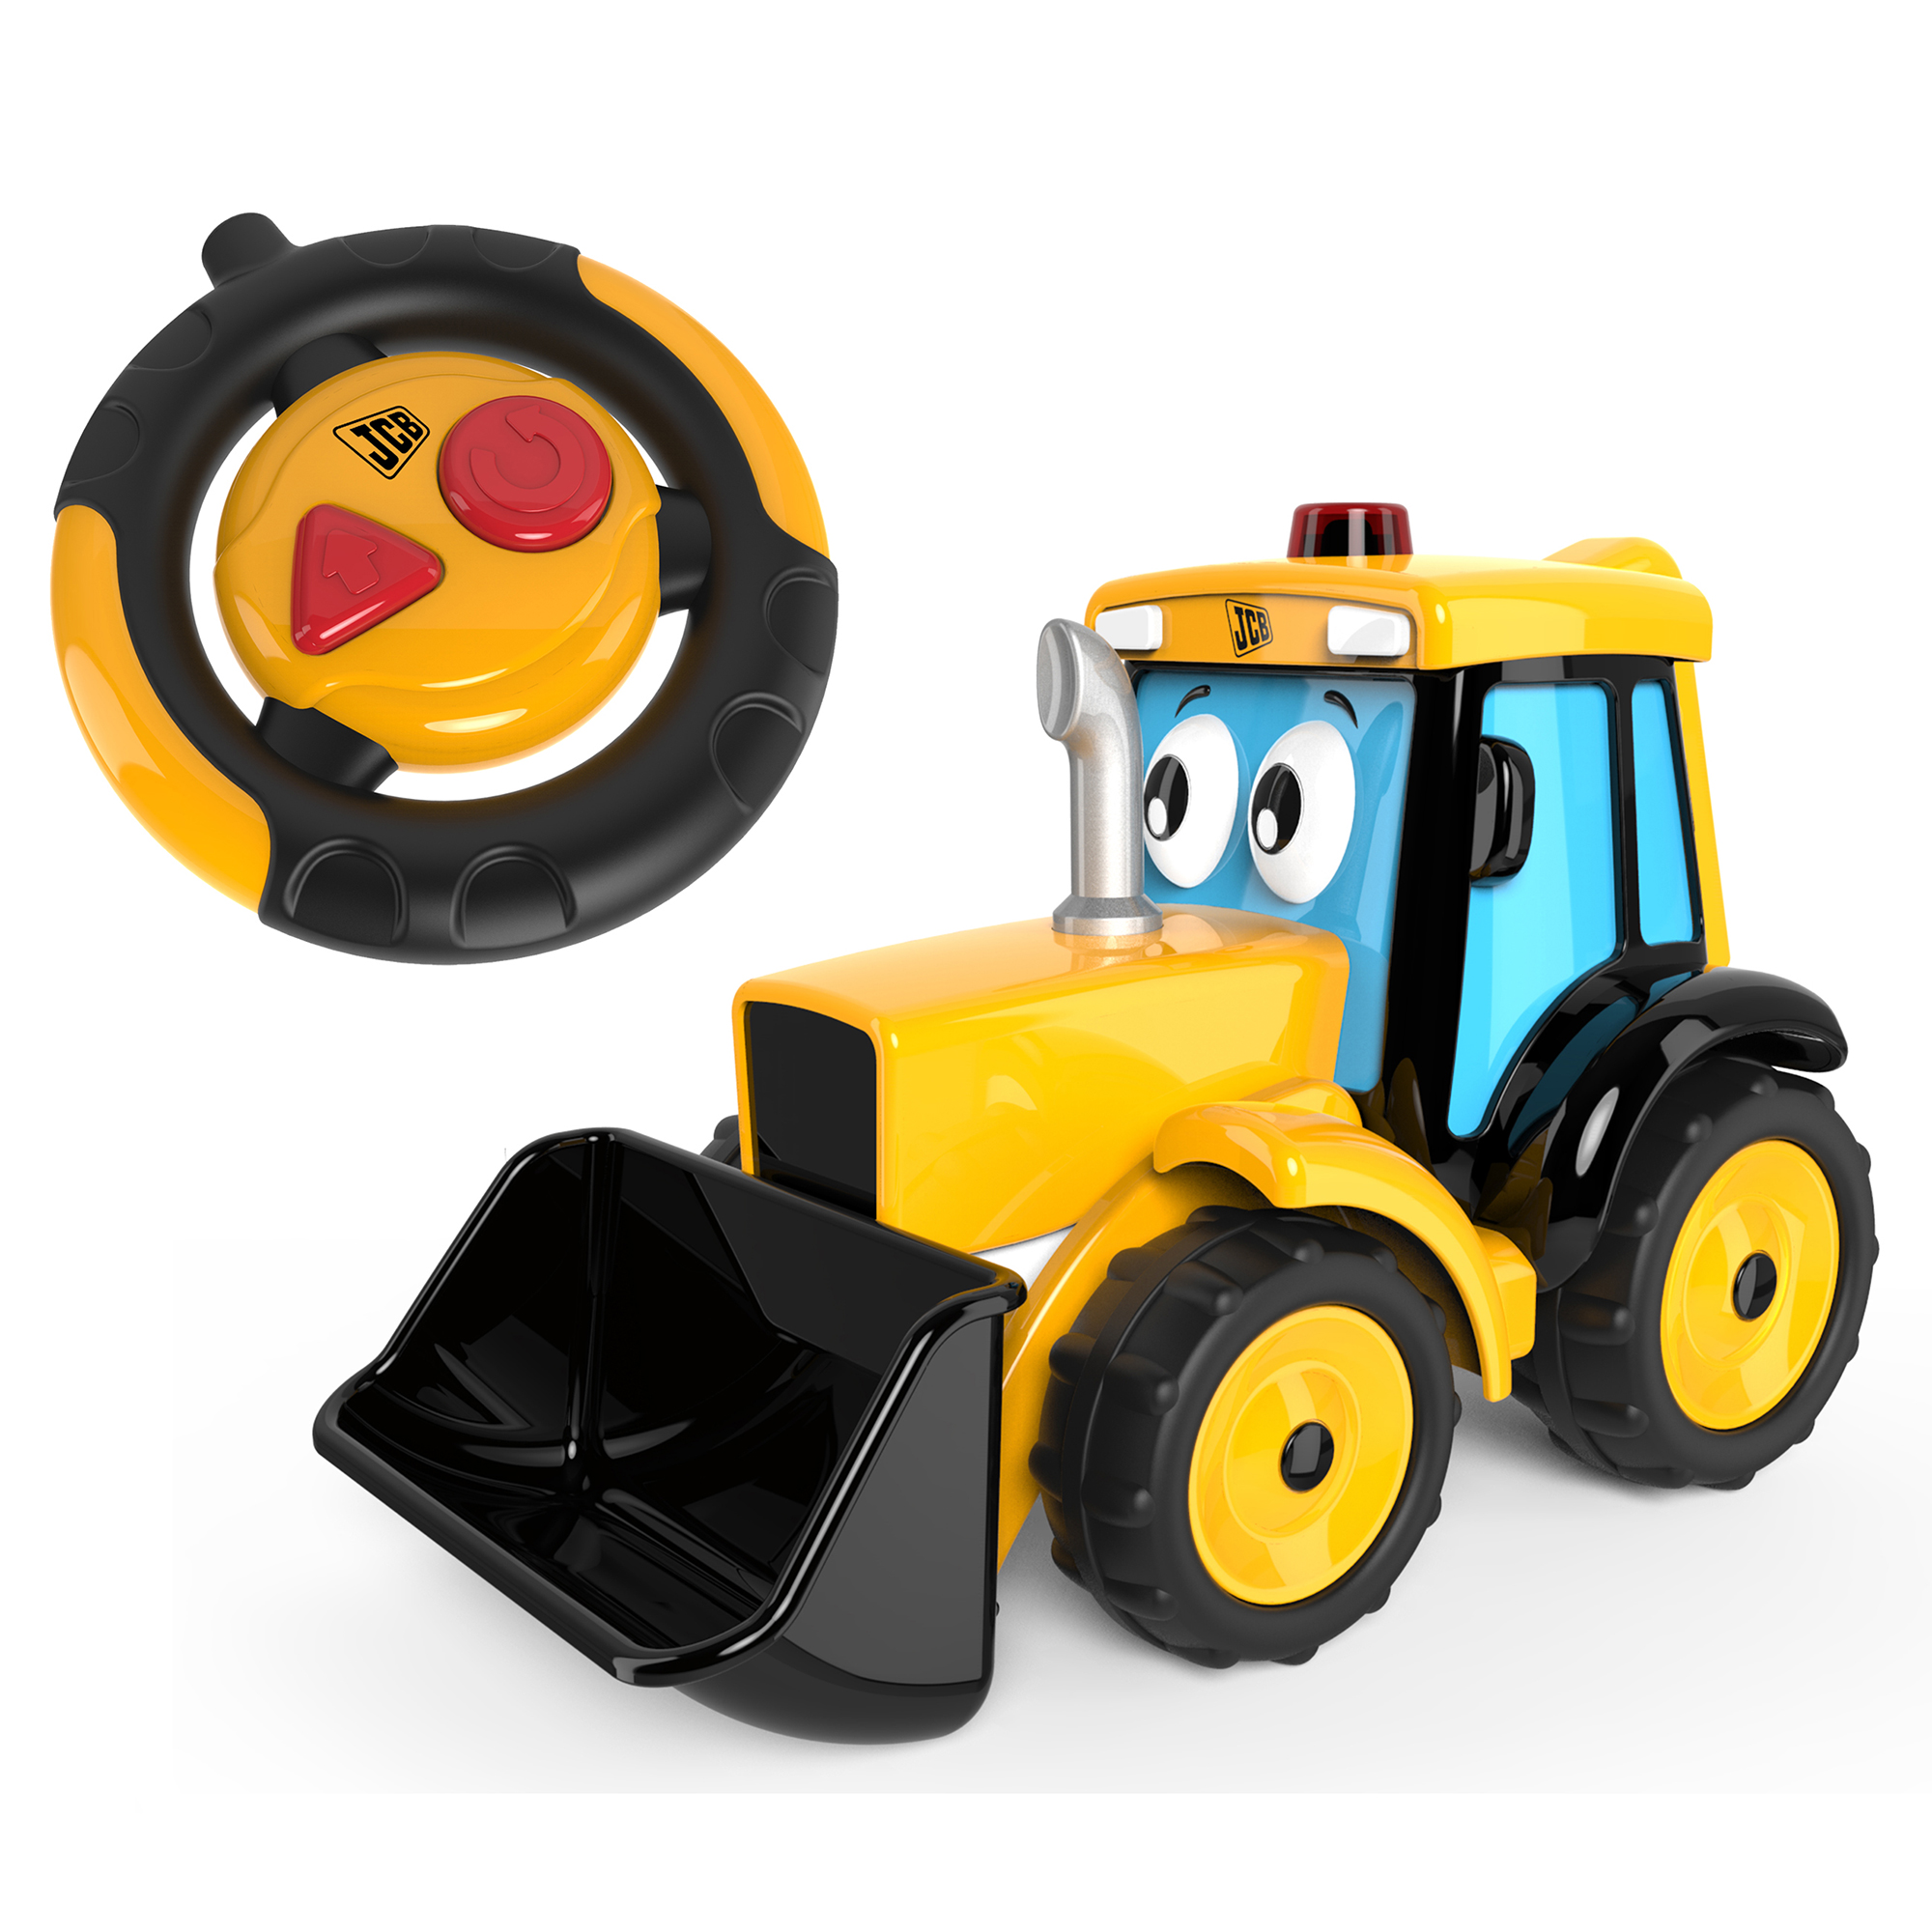 Teamsterz My 1st JCB Joey Remote Control Digger at Toys R Us UK